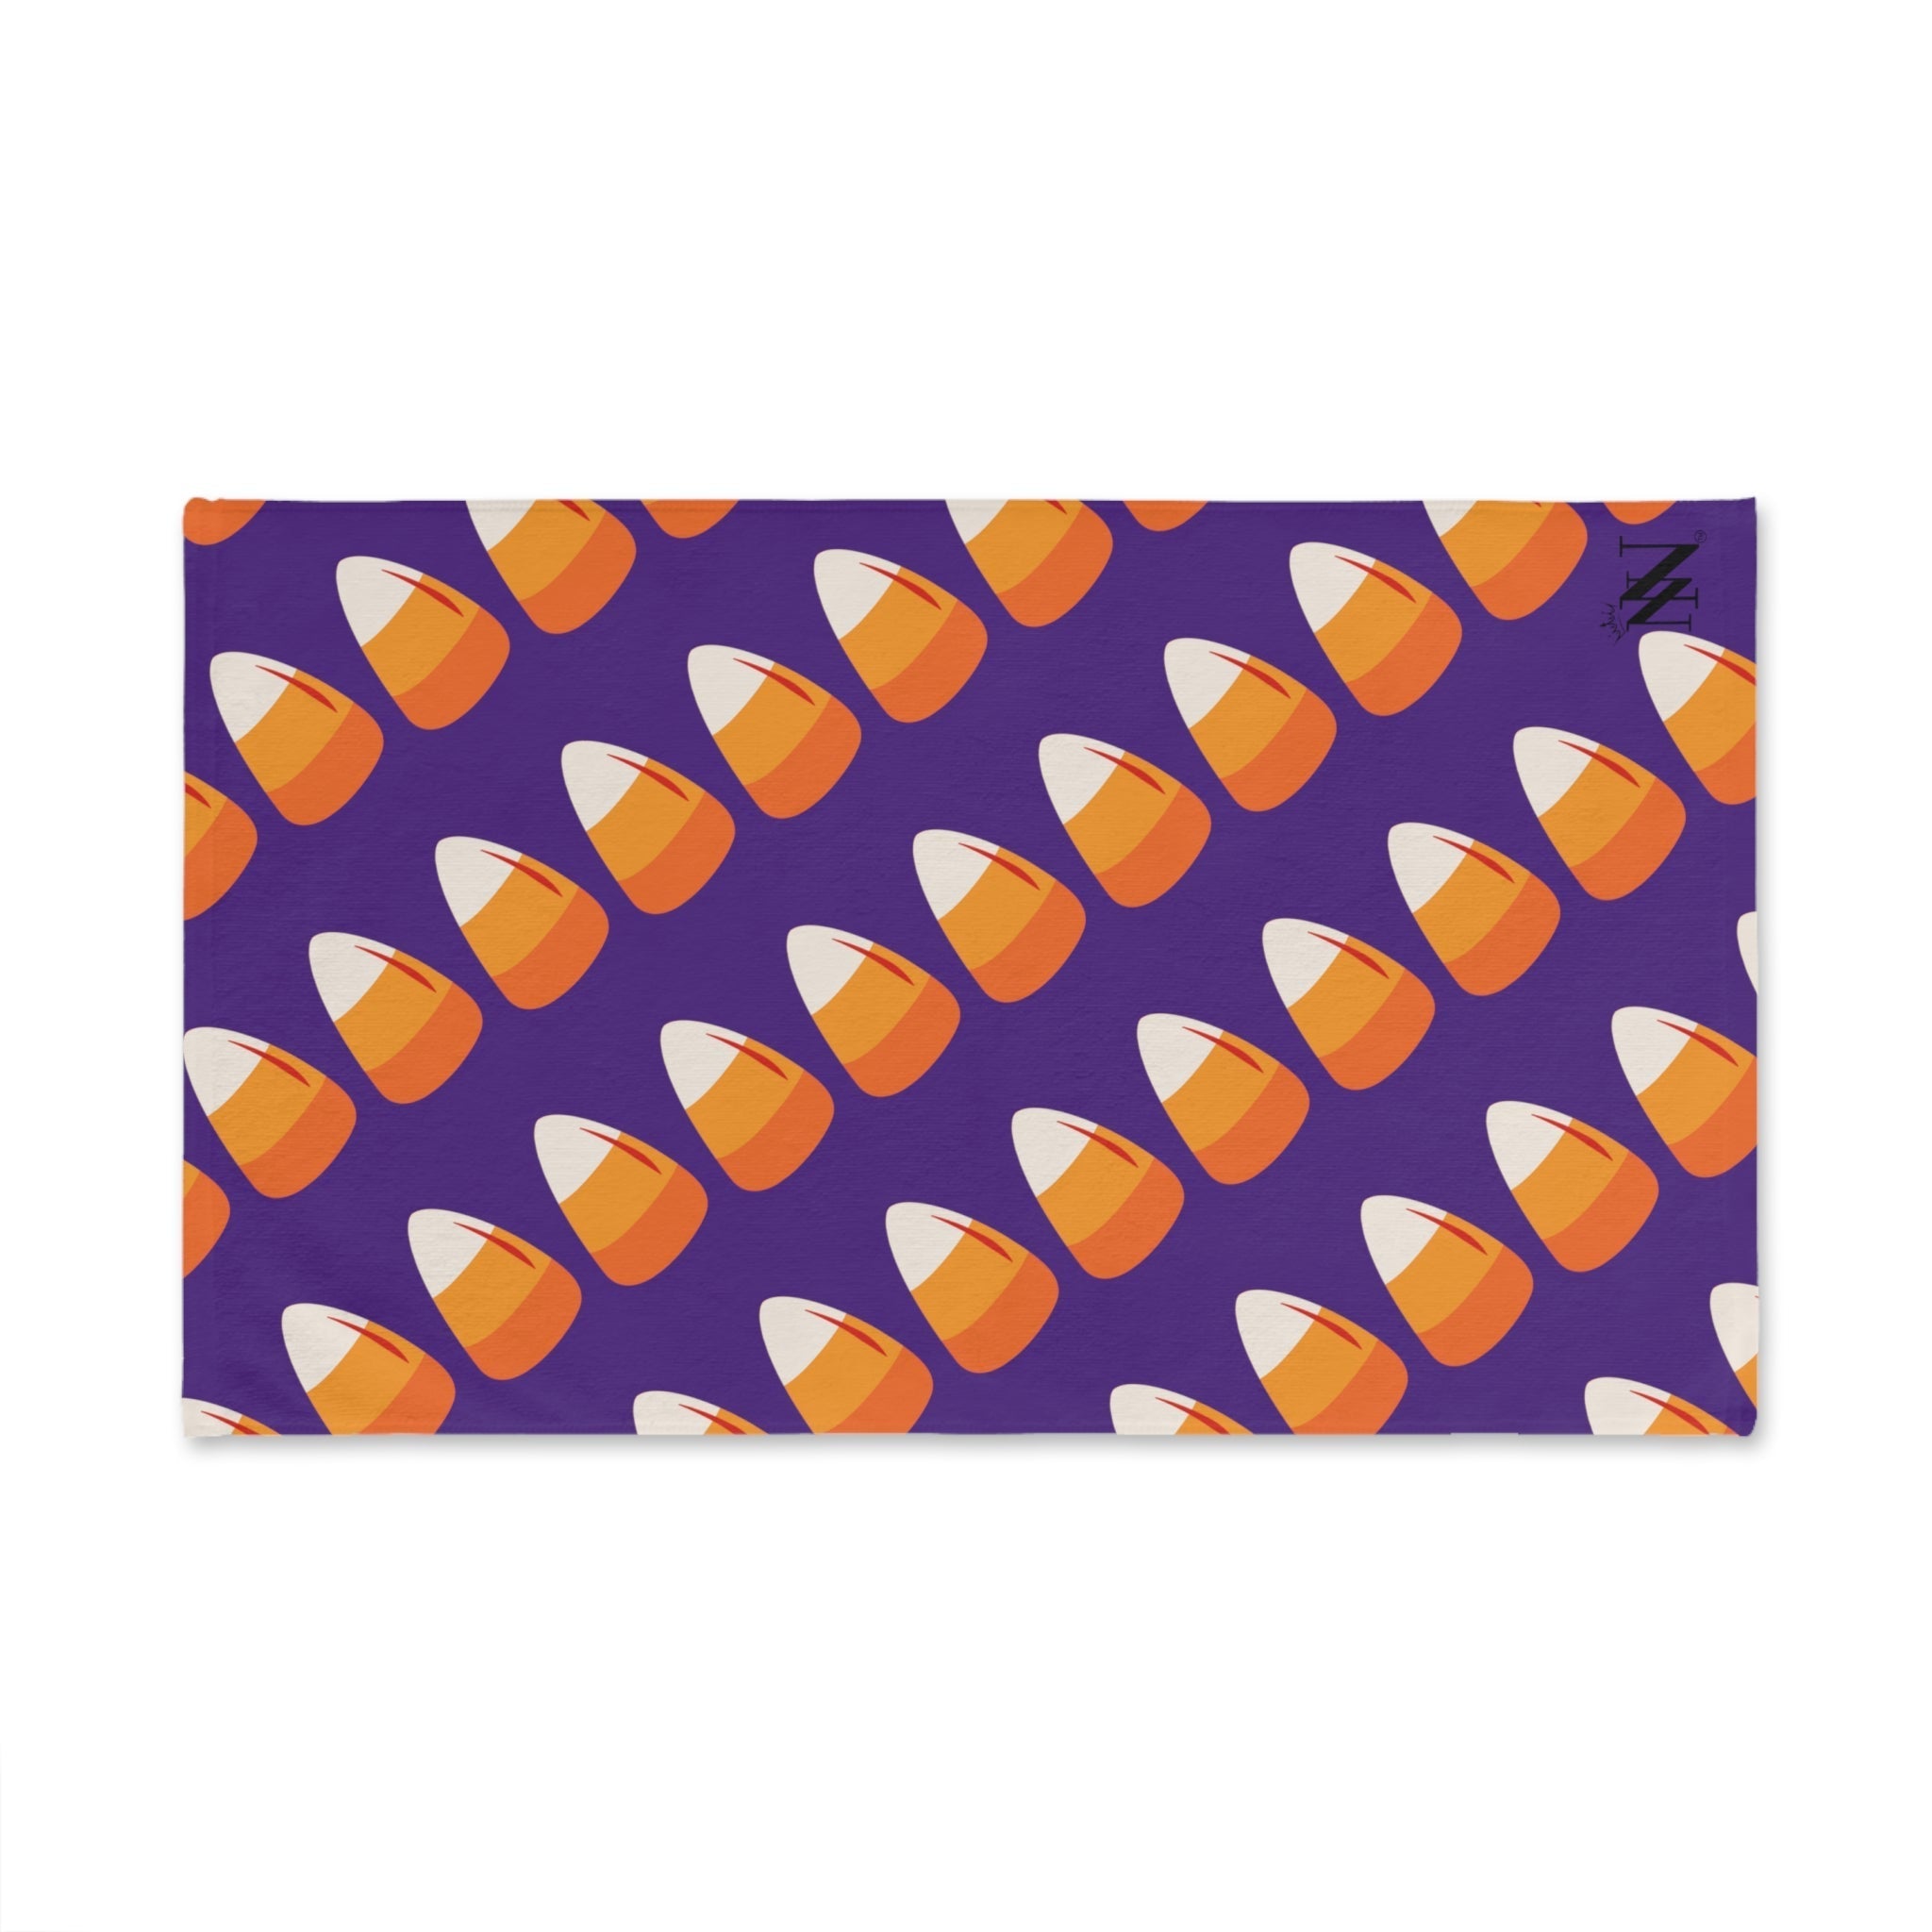 Candy Corn Purple | Funny Gifts for Men - Gifts for Him - Birthday Gifts for Men, Him, Husband, Boyfriend, New Couple Gifts, Fathers & Valentines Day Gifts, Christmas Gifts NECTAR NAPKINS